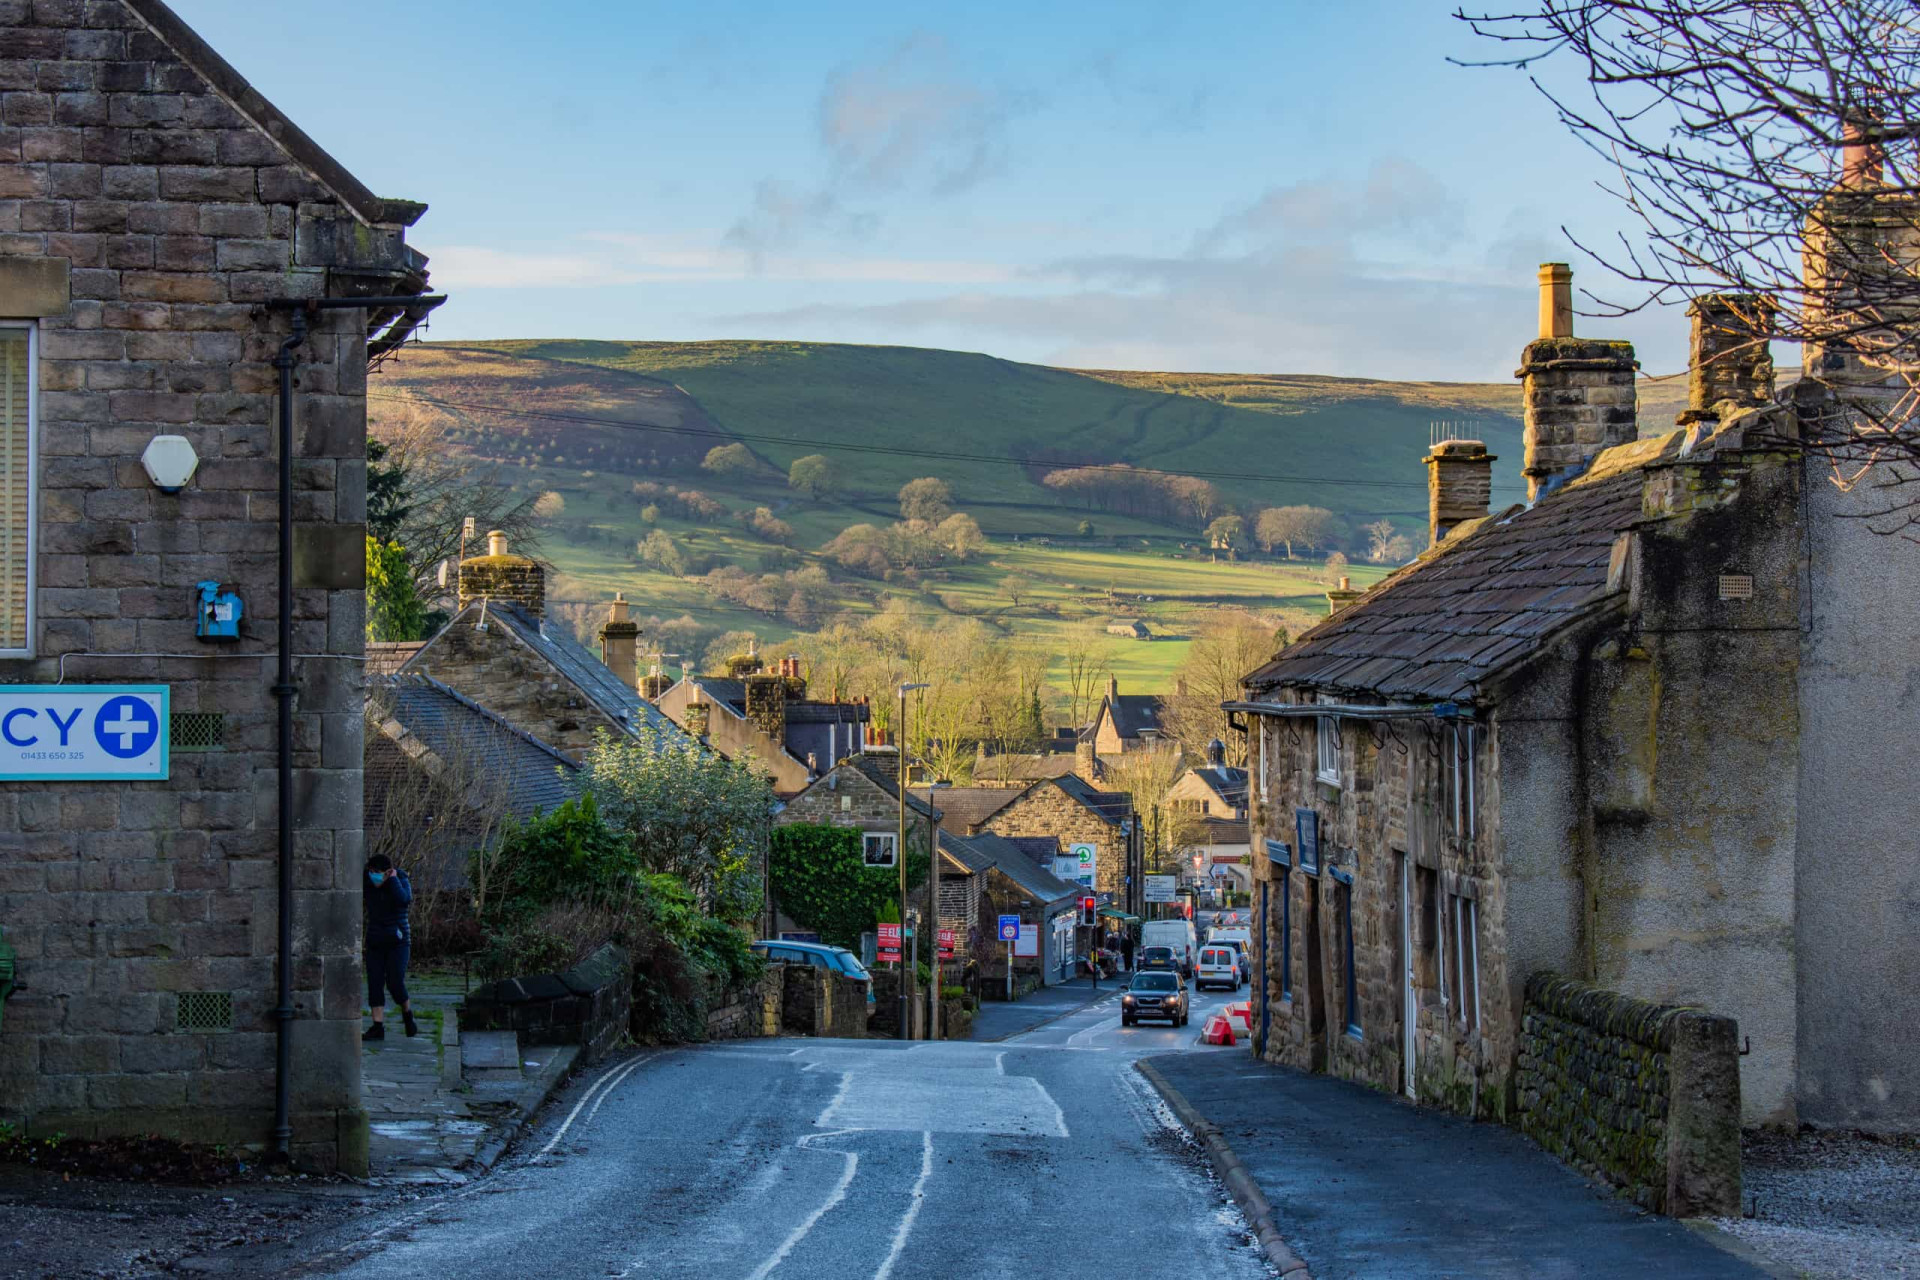 <p>If you are going around the Peak District in the UK, then you must stop at the adorable town of Hathersage, Derbyshire. Surrounding it are beautiful hiking trails and some great local pubs.</p>